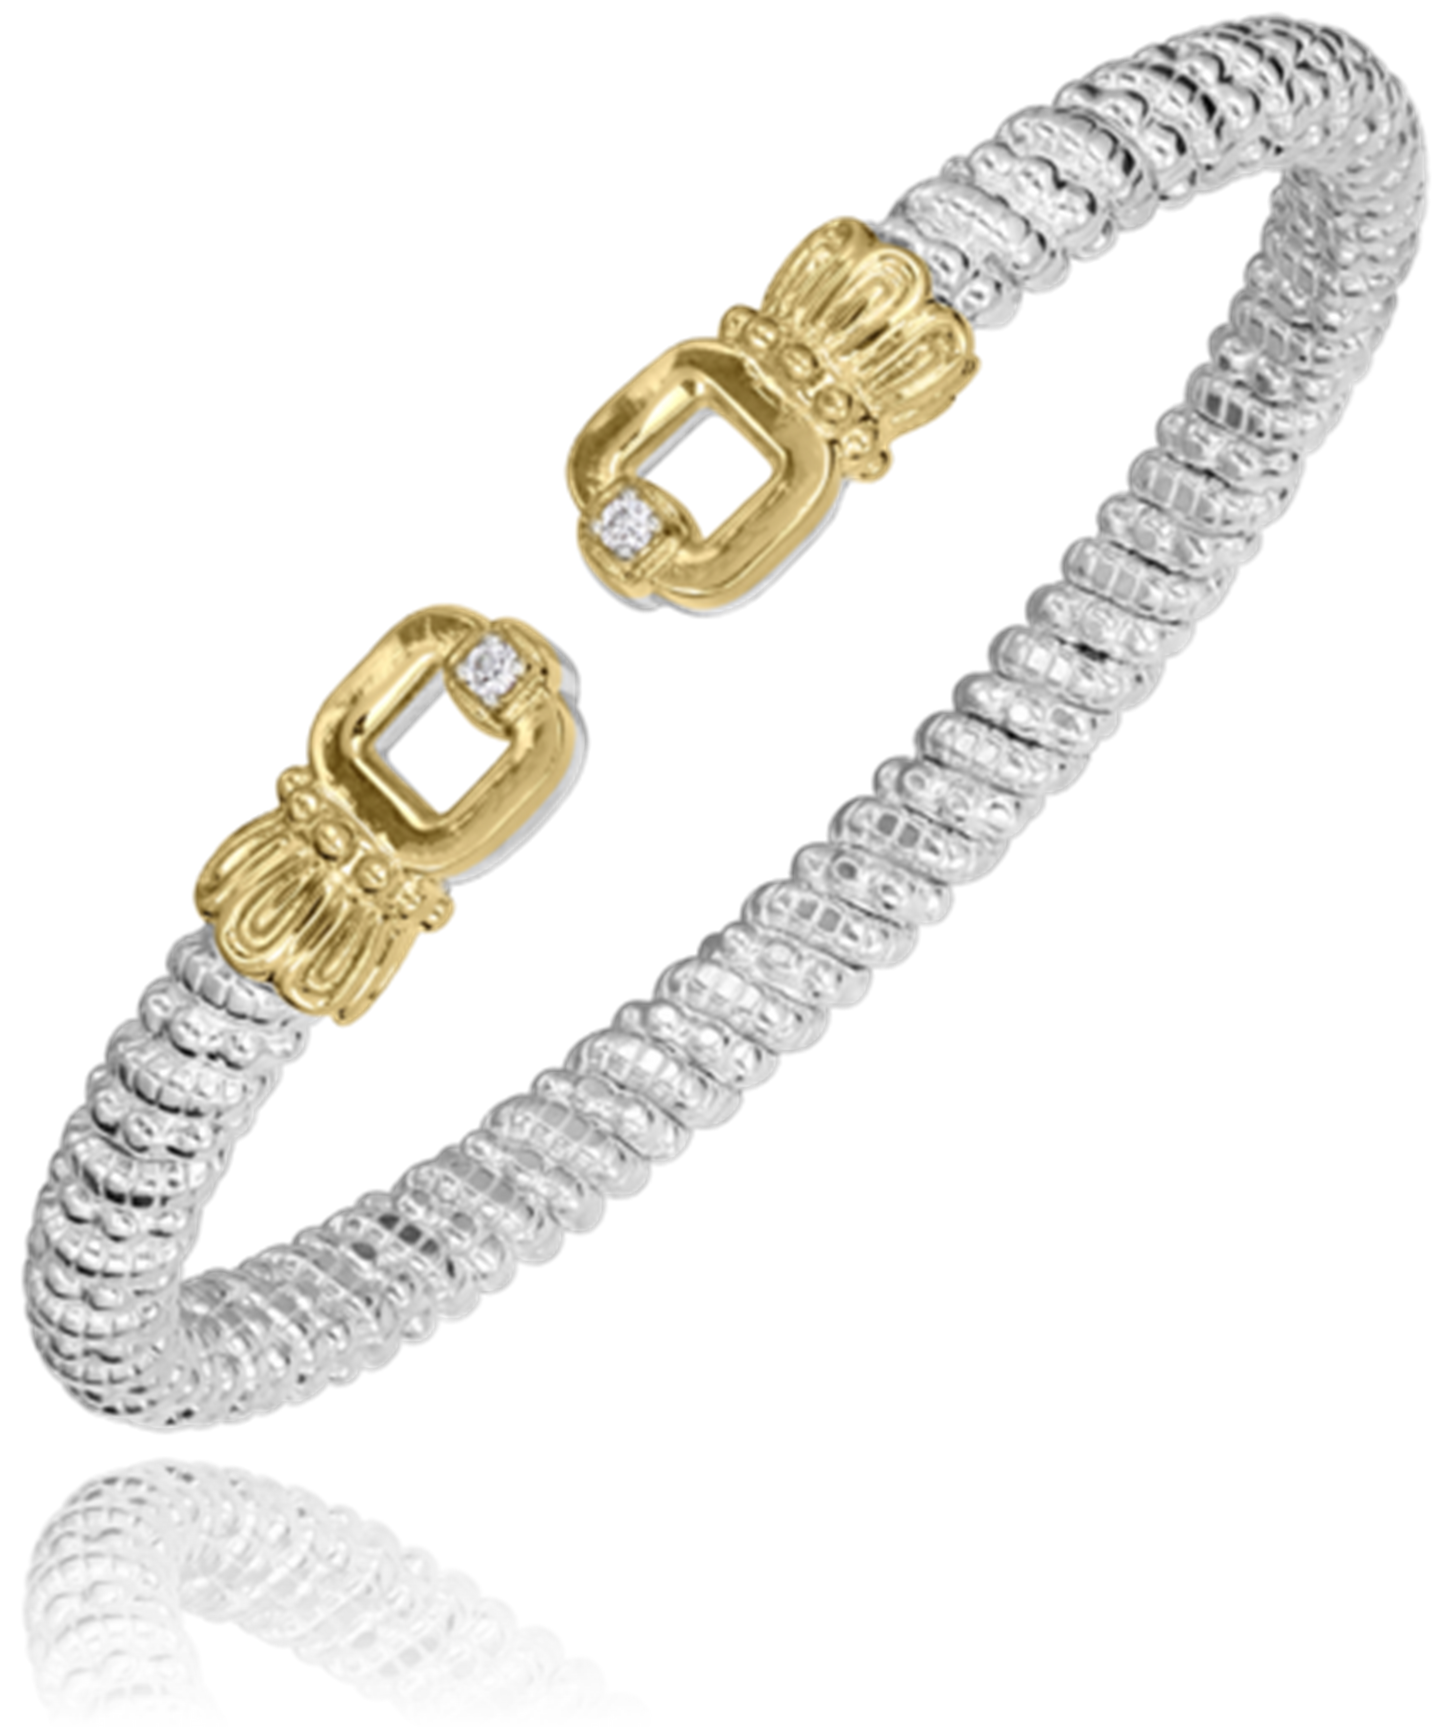 14K Yellow Gold and Sterling Silver Diamond Bracelet